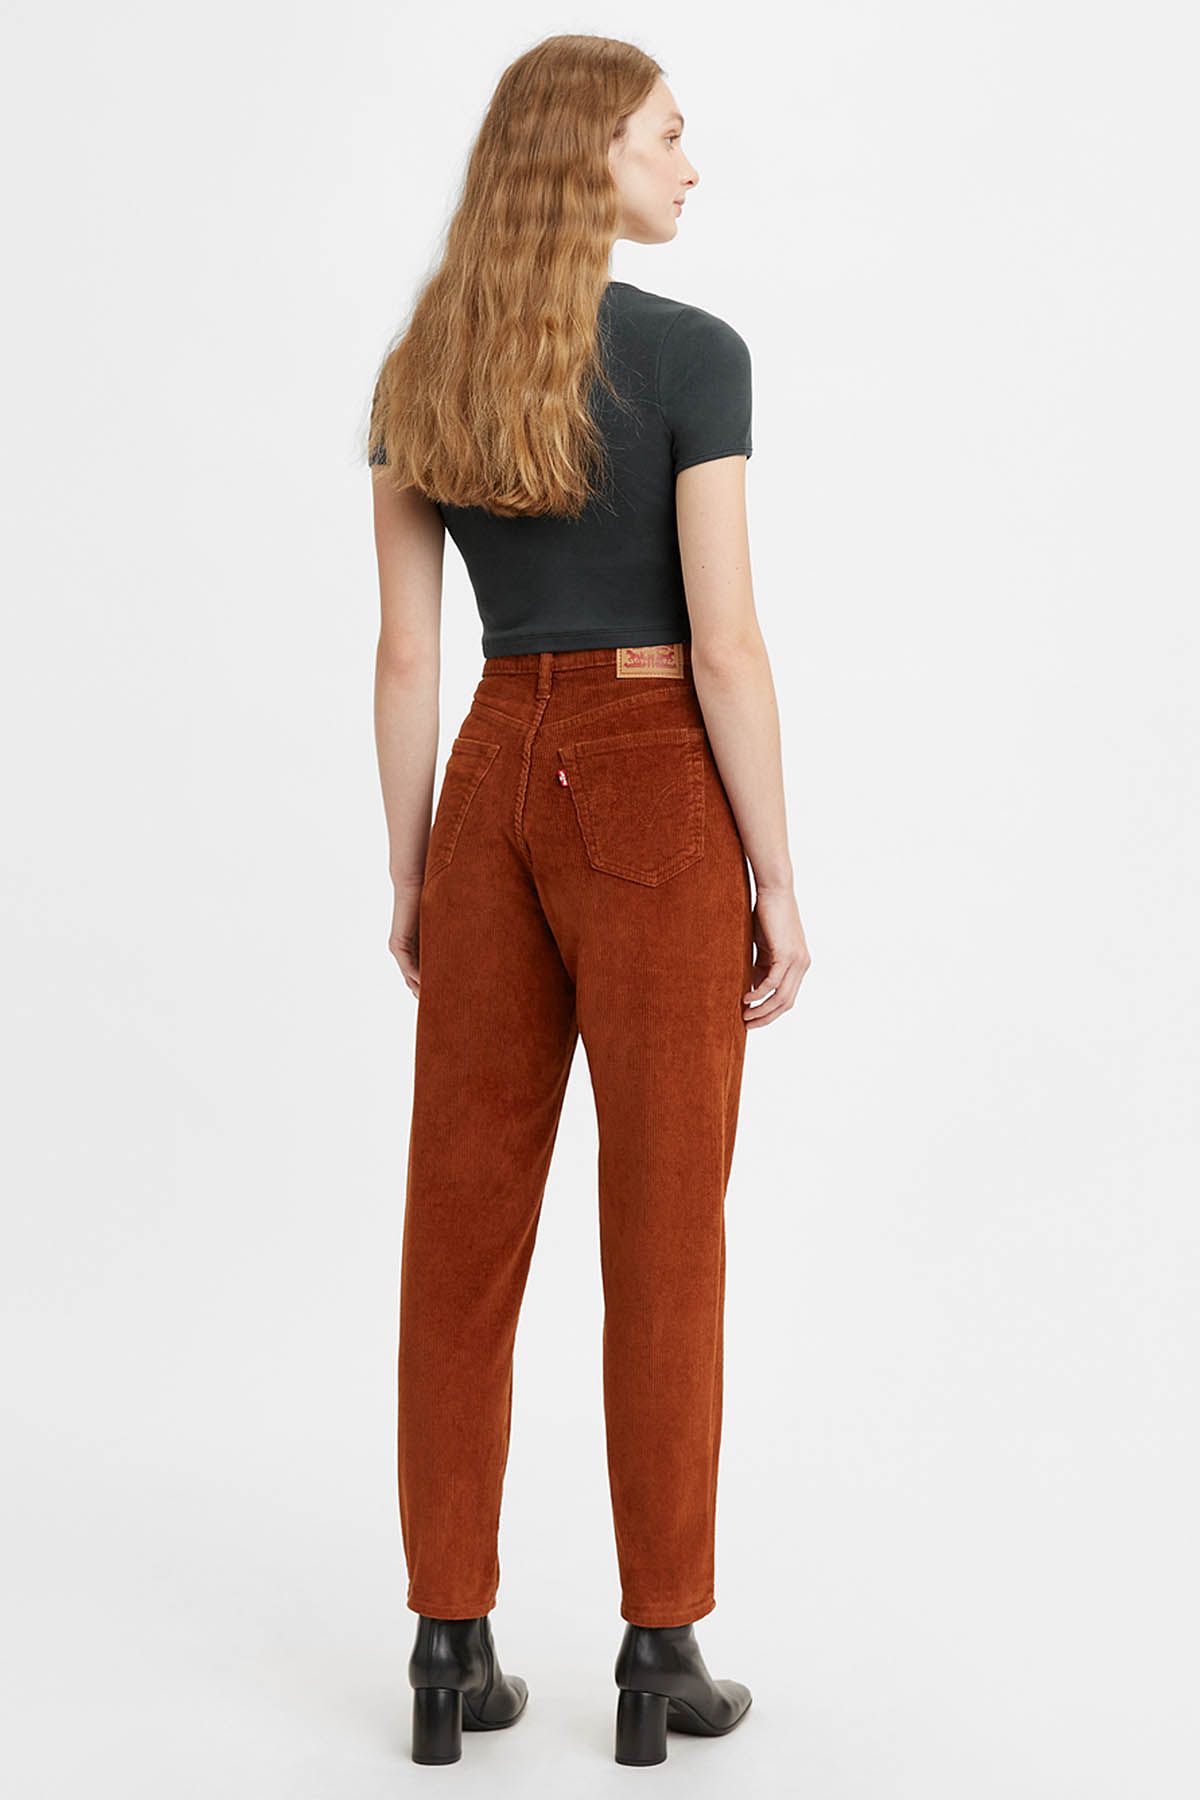 Levi's ® Levi's Women's High-Waisted Mom Jeans Brown Women Jeans